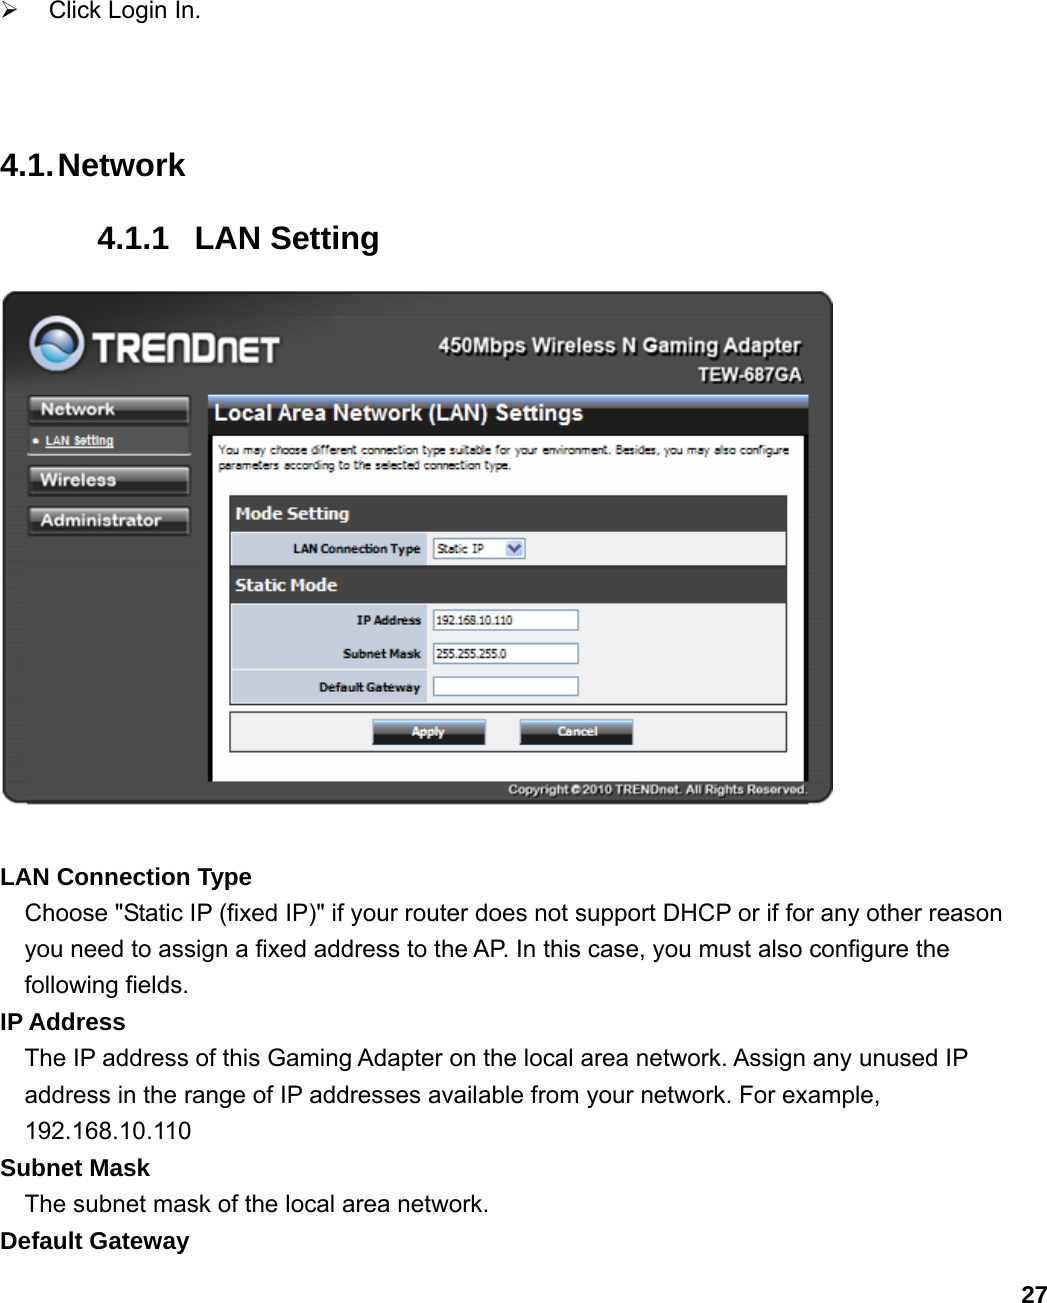                             27¾  Click Login In.   4.1. Network 4.1.1 LAN Setting   LAN Connection Type Choose &quot;Static IP (fixed IP)&quot; if your router does not support DHCP or if for any other reason you need to assign a fixed address to the AP. In this case, you must also configure the following fields.   IP Address   The IP address of this Gaming Adapter on the local area network. Assign any unused IP address in the range of IP addresses available from your network. For example, 192.168.10.110 Subnet Mask   The subnet mask of the local area network.   Default Gateway   